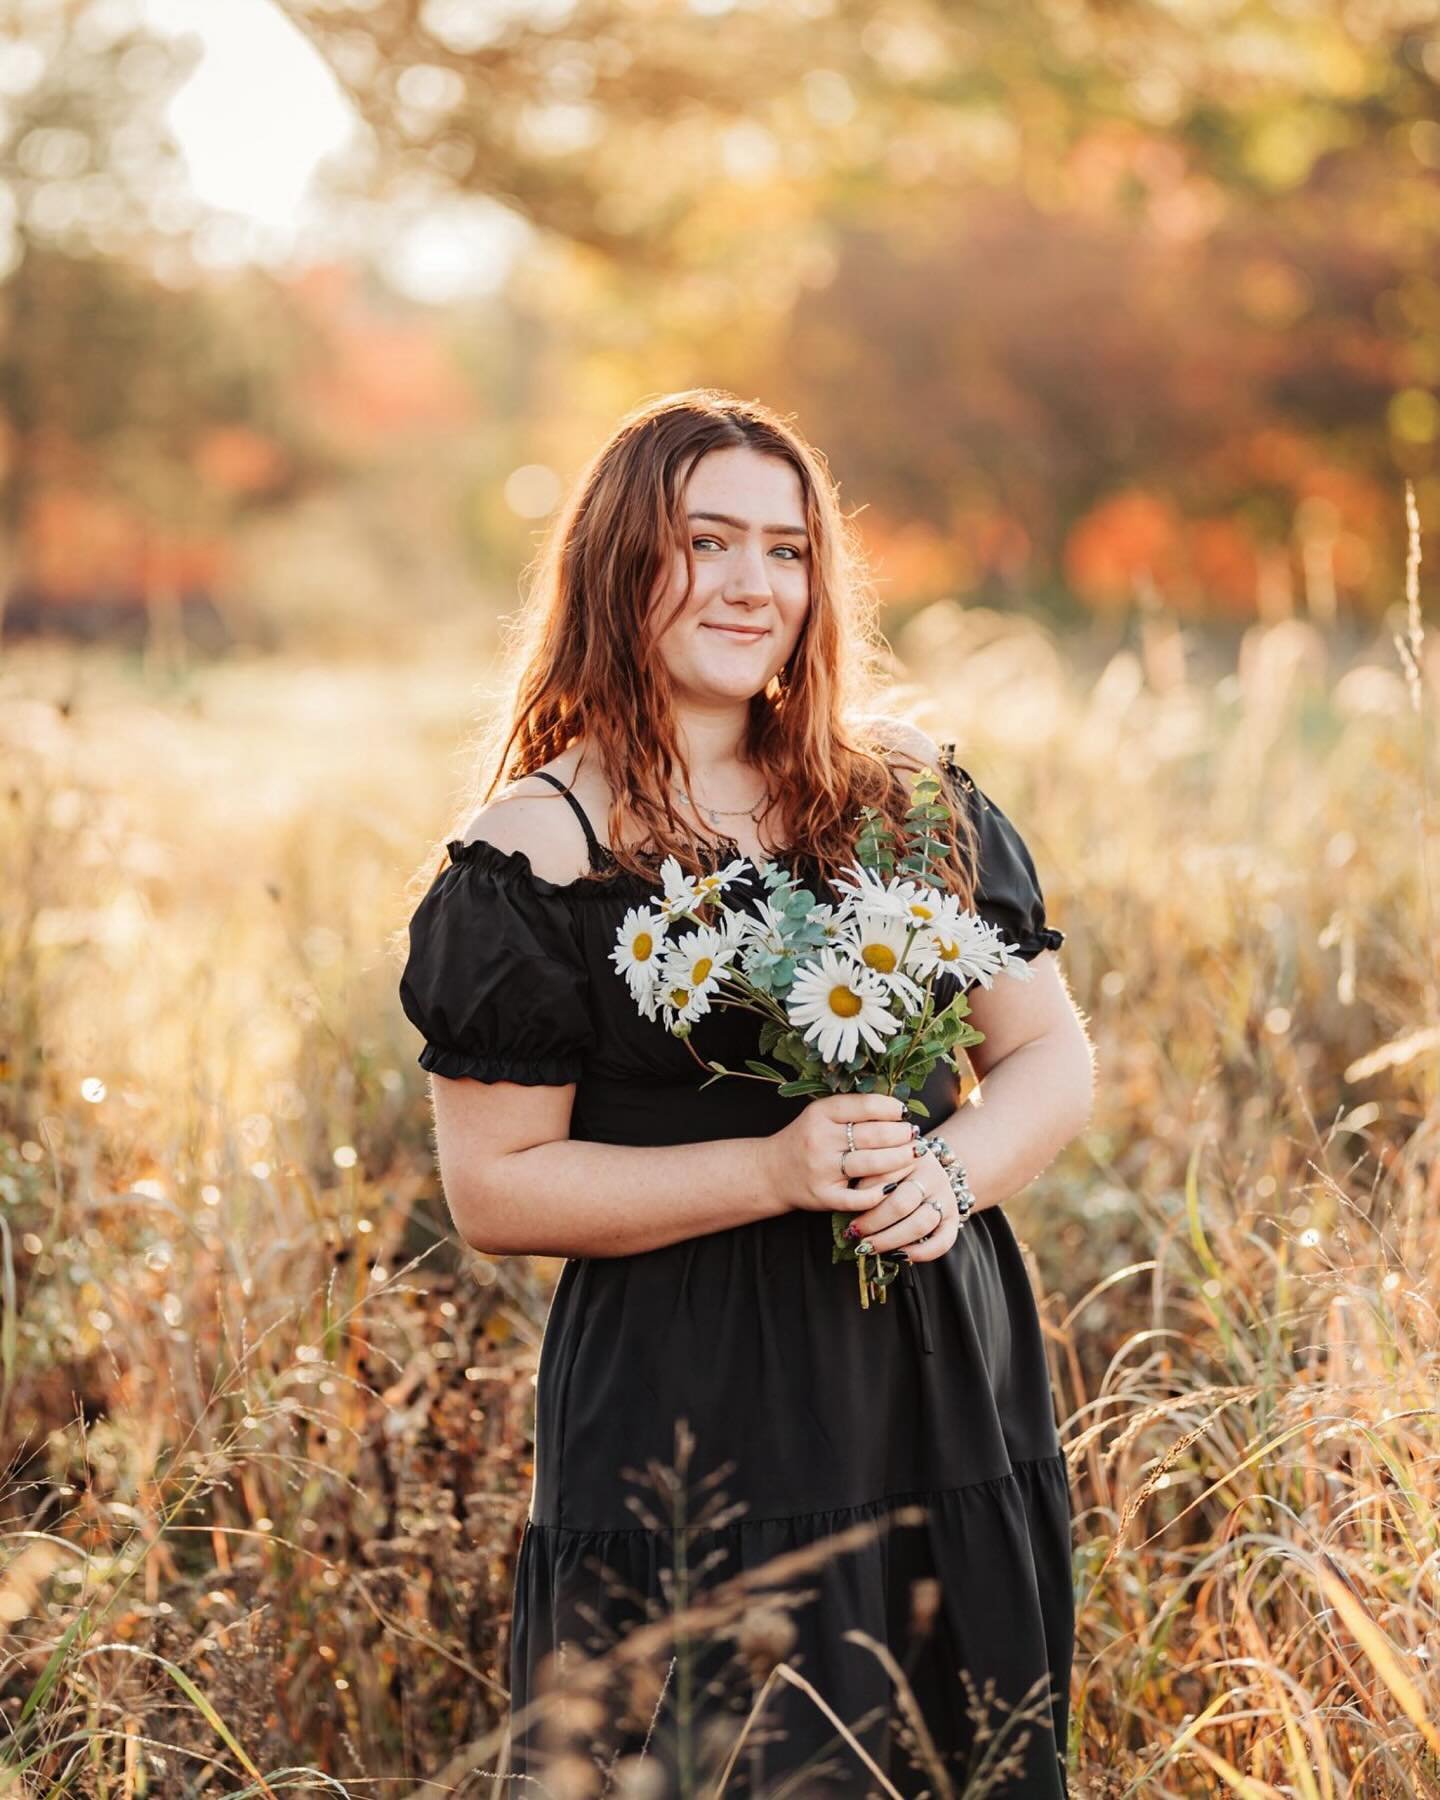 Happy senior Sunday with the gorgeous Mary! 🌾🌼 Look at the beautiful glow this girl exudes. 🤩Mary, you were such a joy to shoot with, I hope you're enjoying your senior year! 💫
.
.
.

Mary | Class of 2024 | Walsh
.
.
.
.
.
#edinamerkelphotography